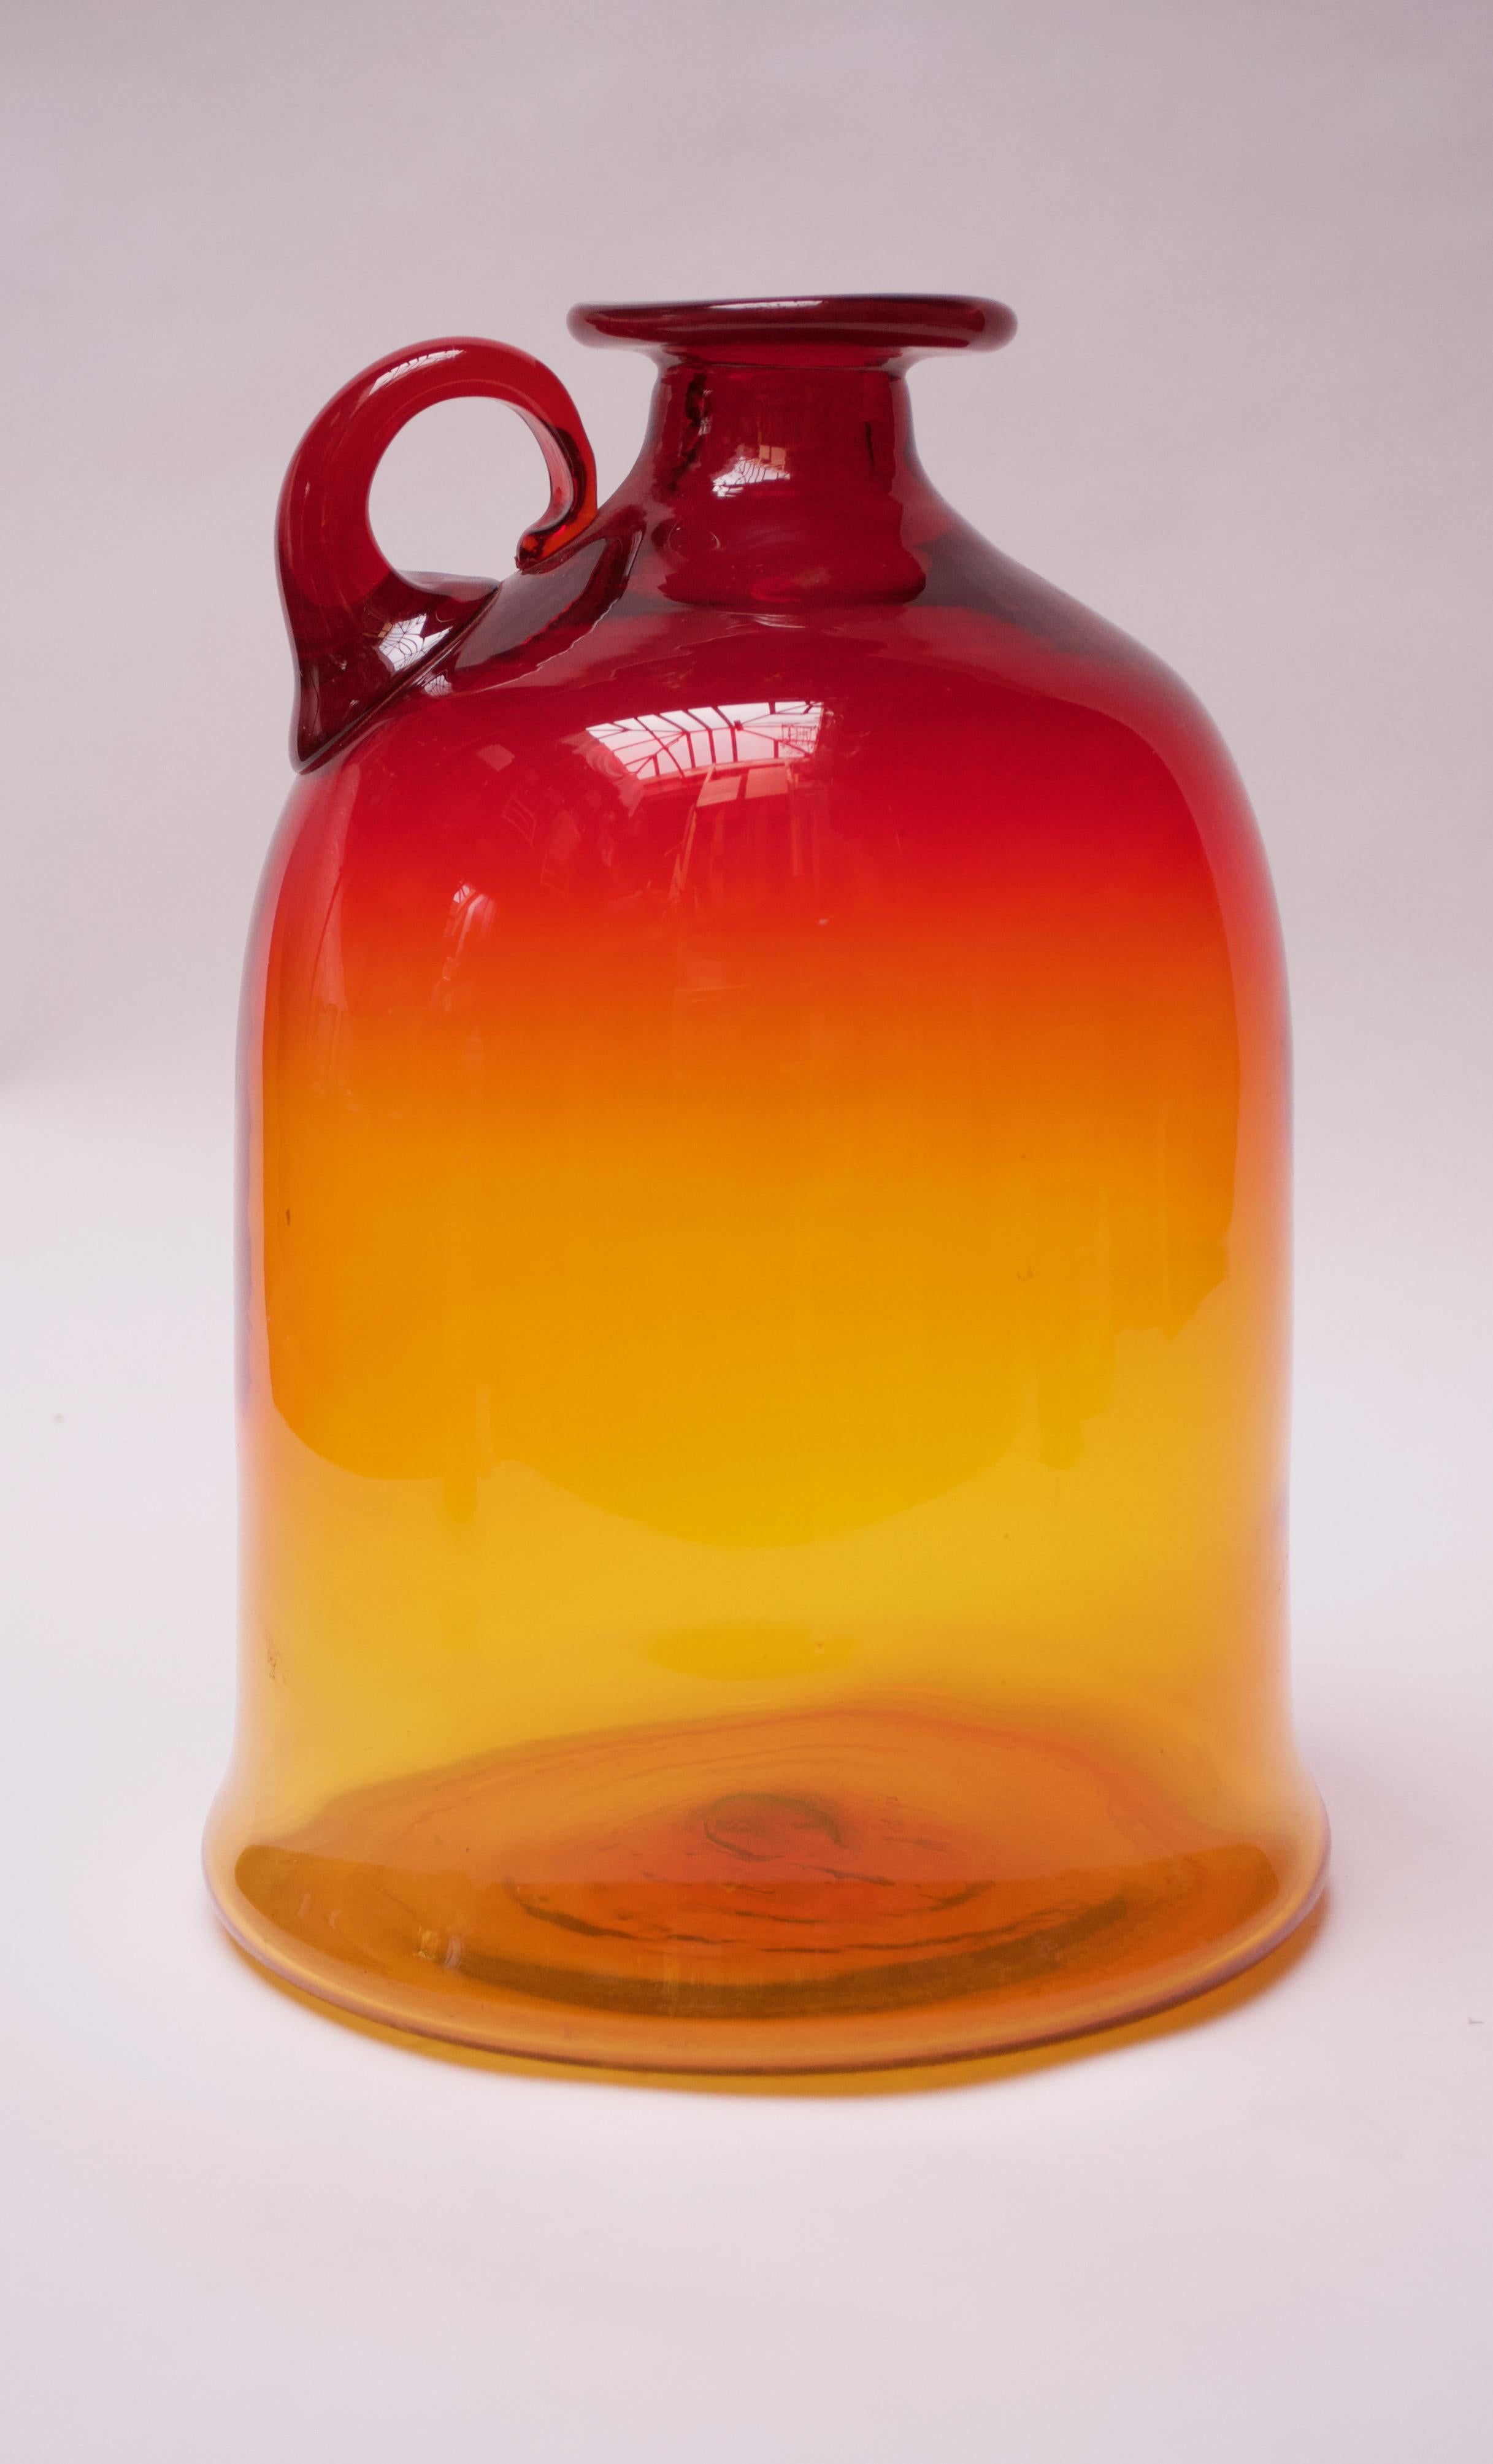 Blown glass jug designed by John Nickerson and manufactured by Blenko. This design first appeared in the 1972 Blenko catalog as model number 7226S. Large size and attractive amberina / tangerine palette with red and yellow meeting to produce an